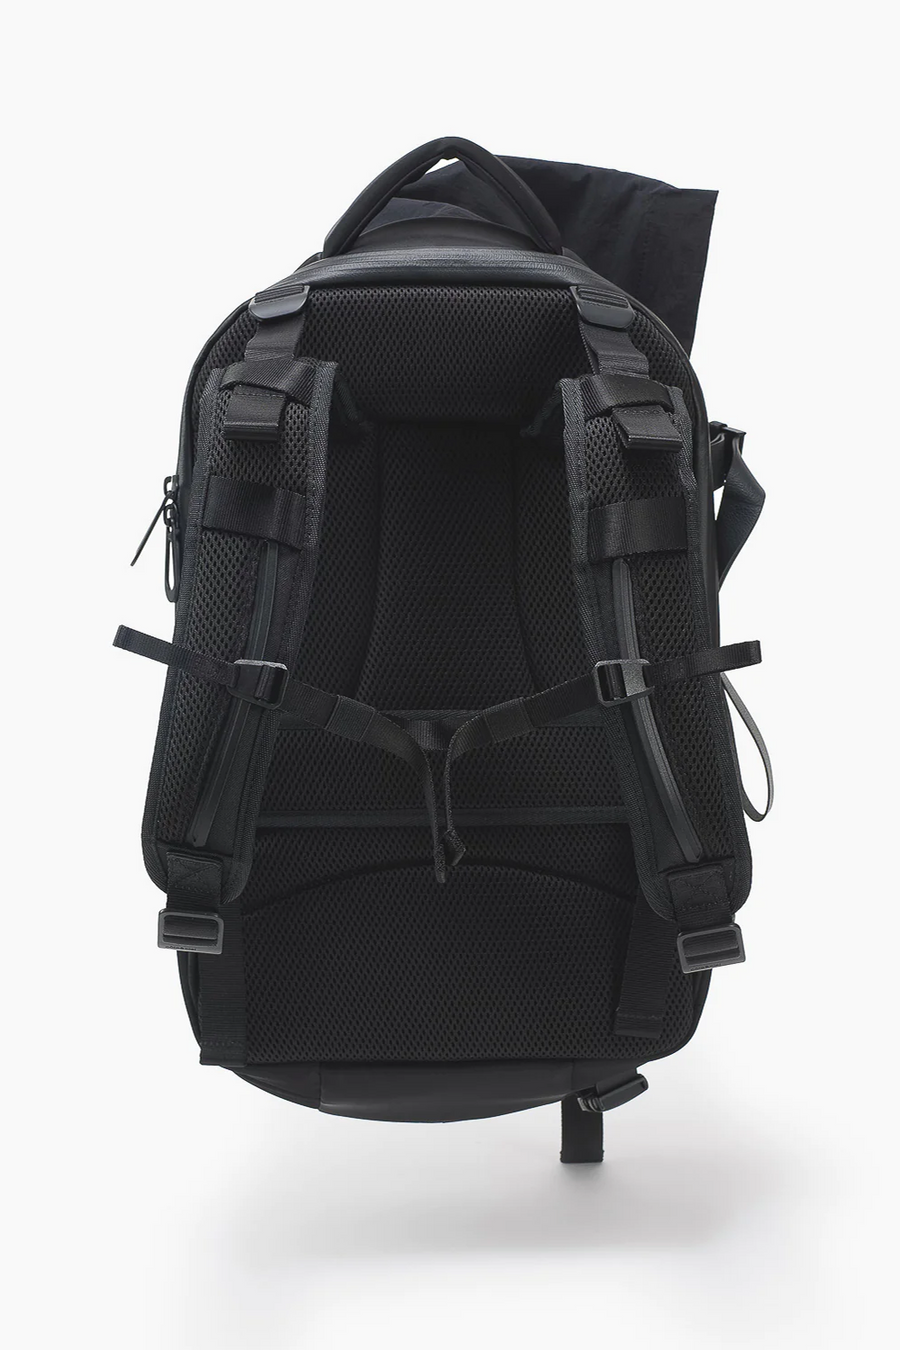 Buy the Cote & Ciel | Isar M Komatsu Onibegie Nylon Backpack in Black at Intro. Spend £50 for free UK delivery. Official stockists. We ship worldwide.